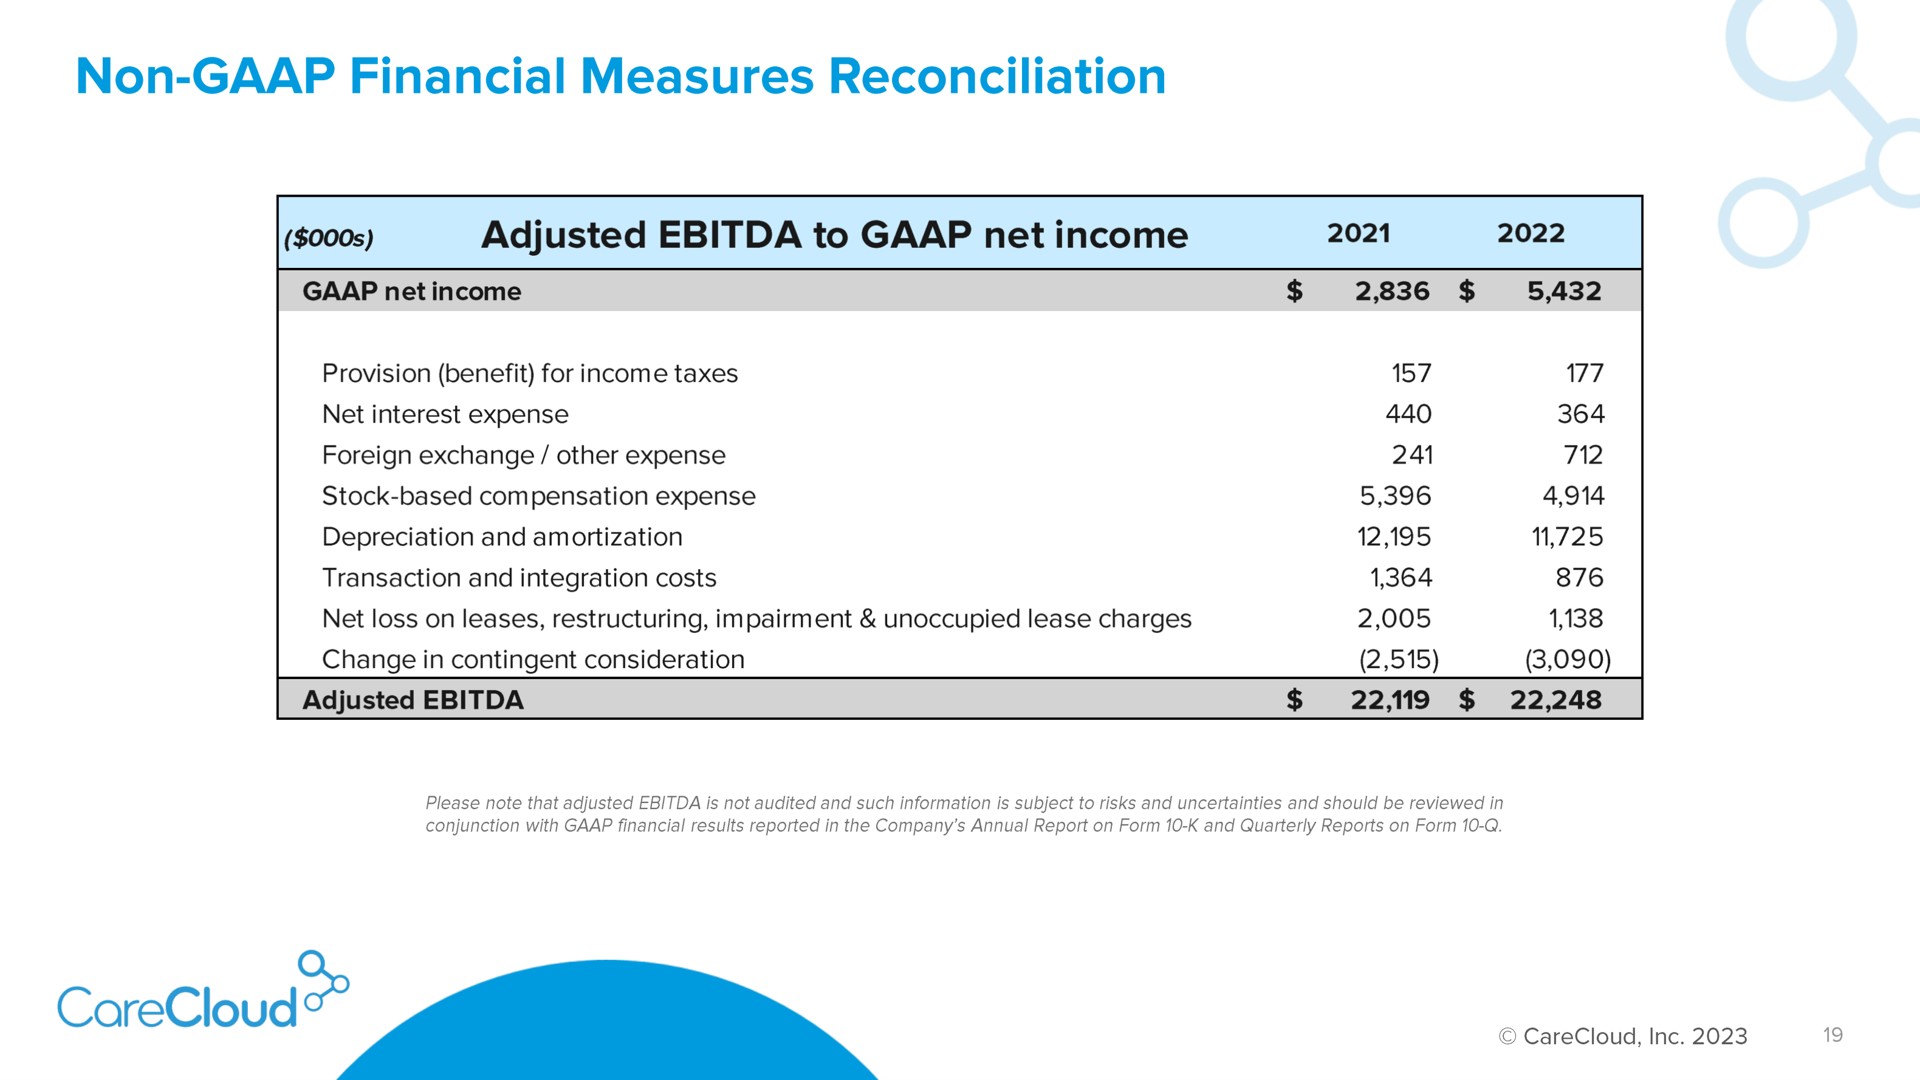 non financial measures reconciliation adjusted to net income | CareCloud